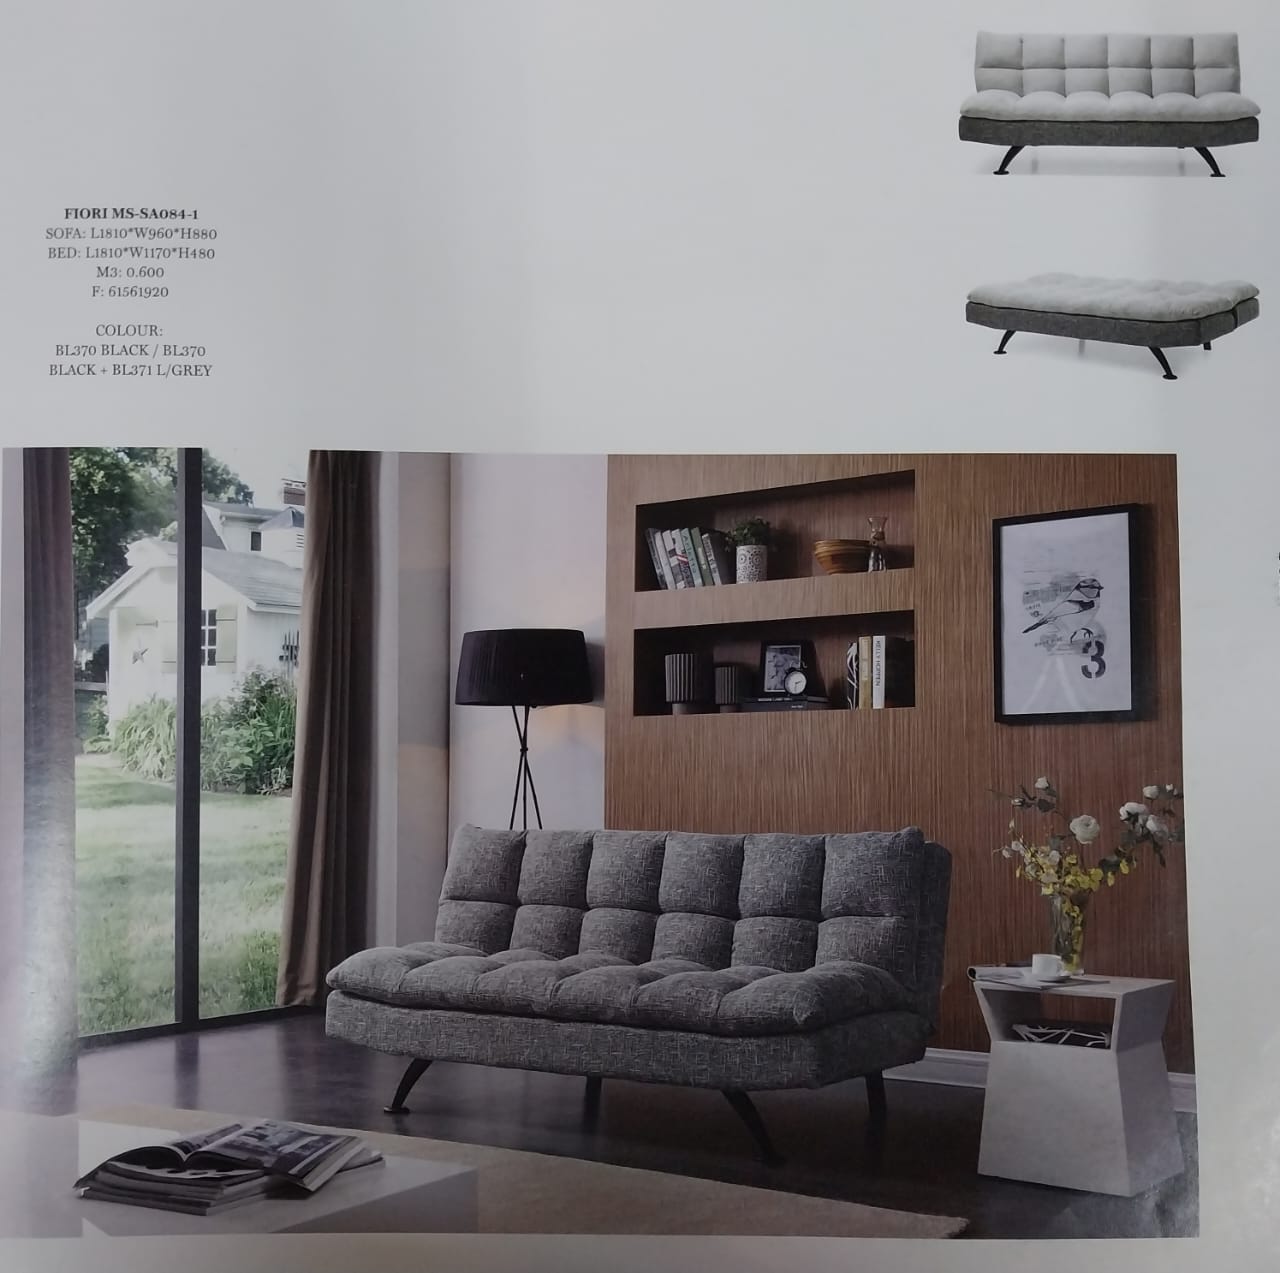 Product: Sofa bed 003